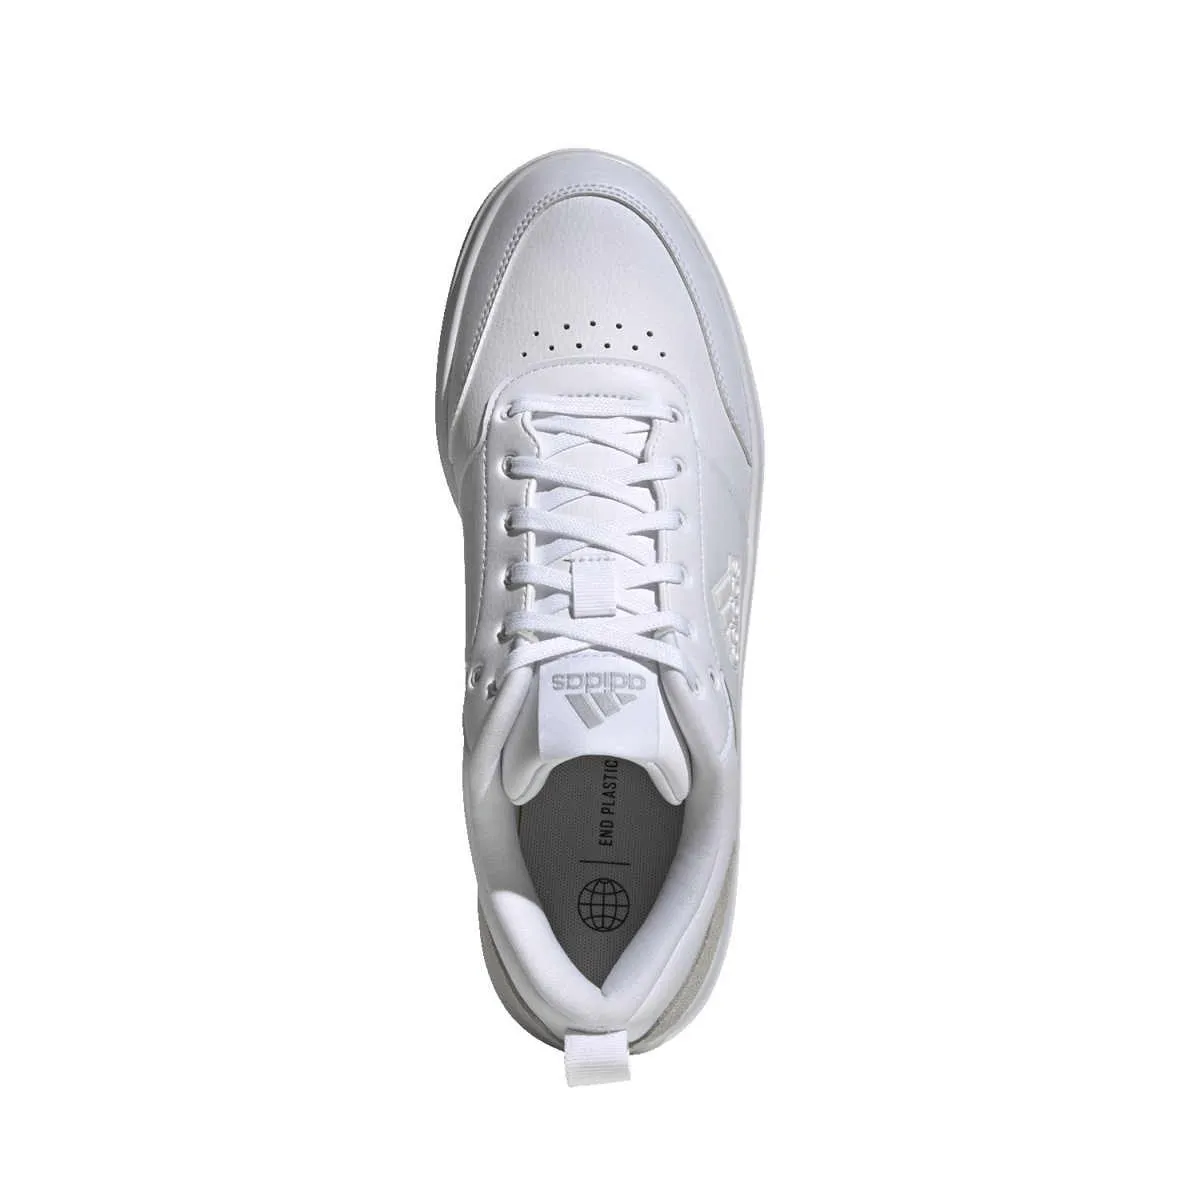 Chaussures adidas Park Street blanches